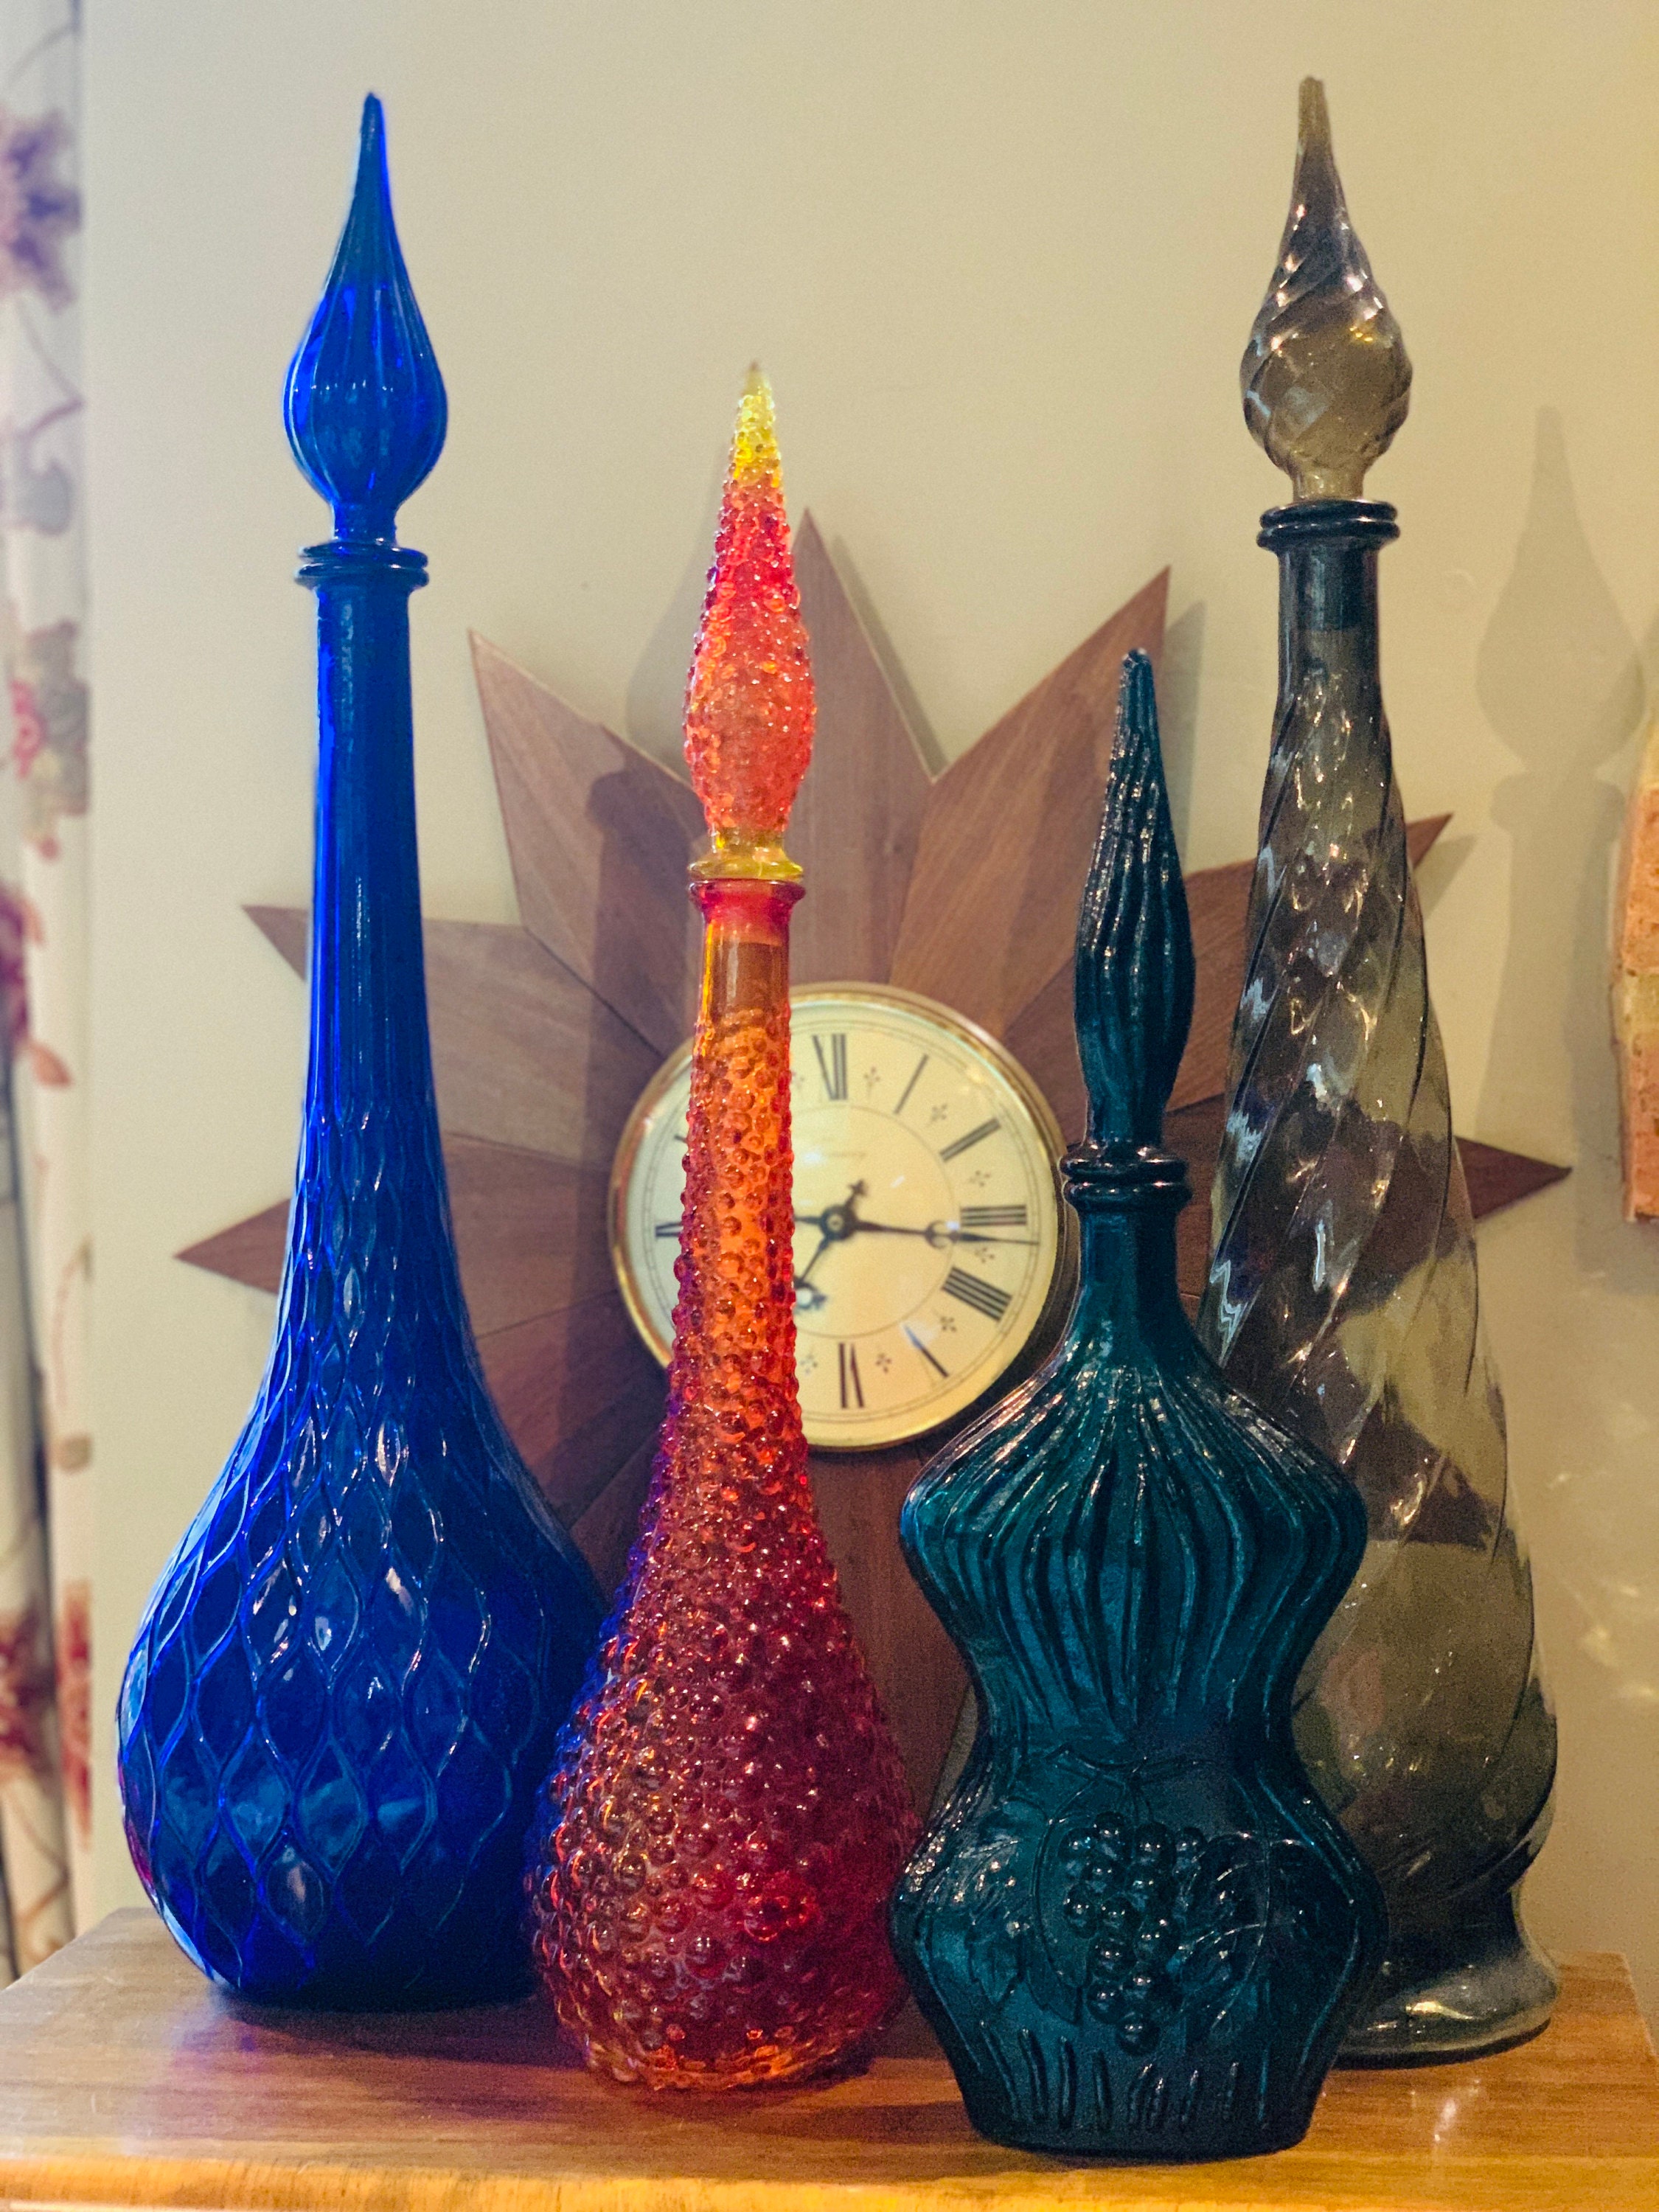 Four mid-century vintage Italian glass genie bottle decanters in cobalt, amberina, teal and smoke